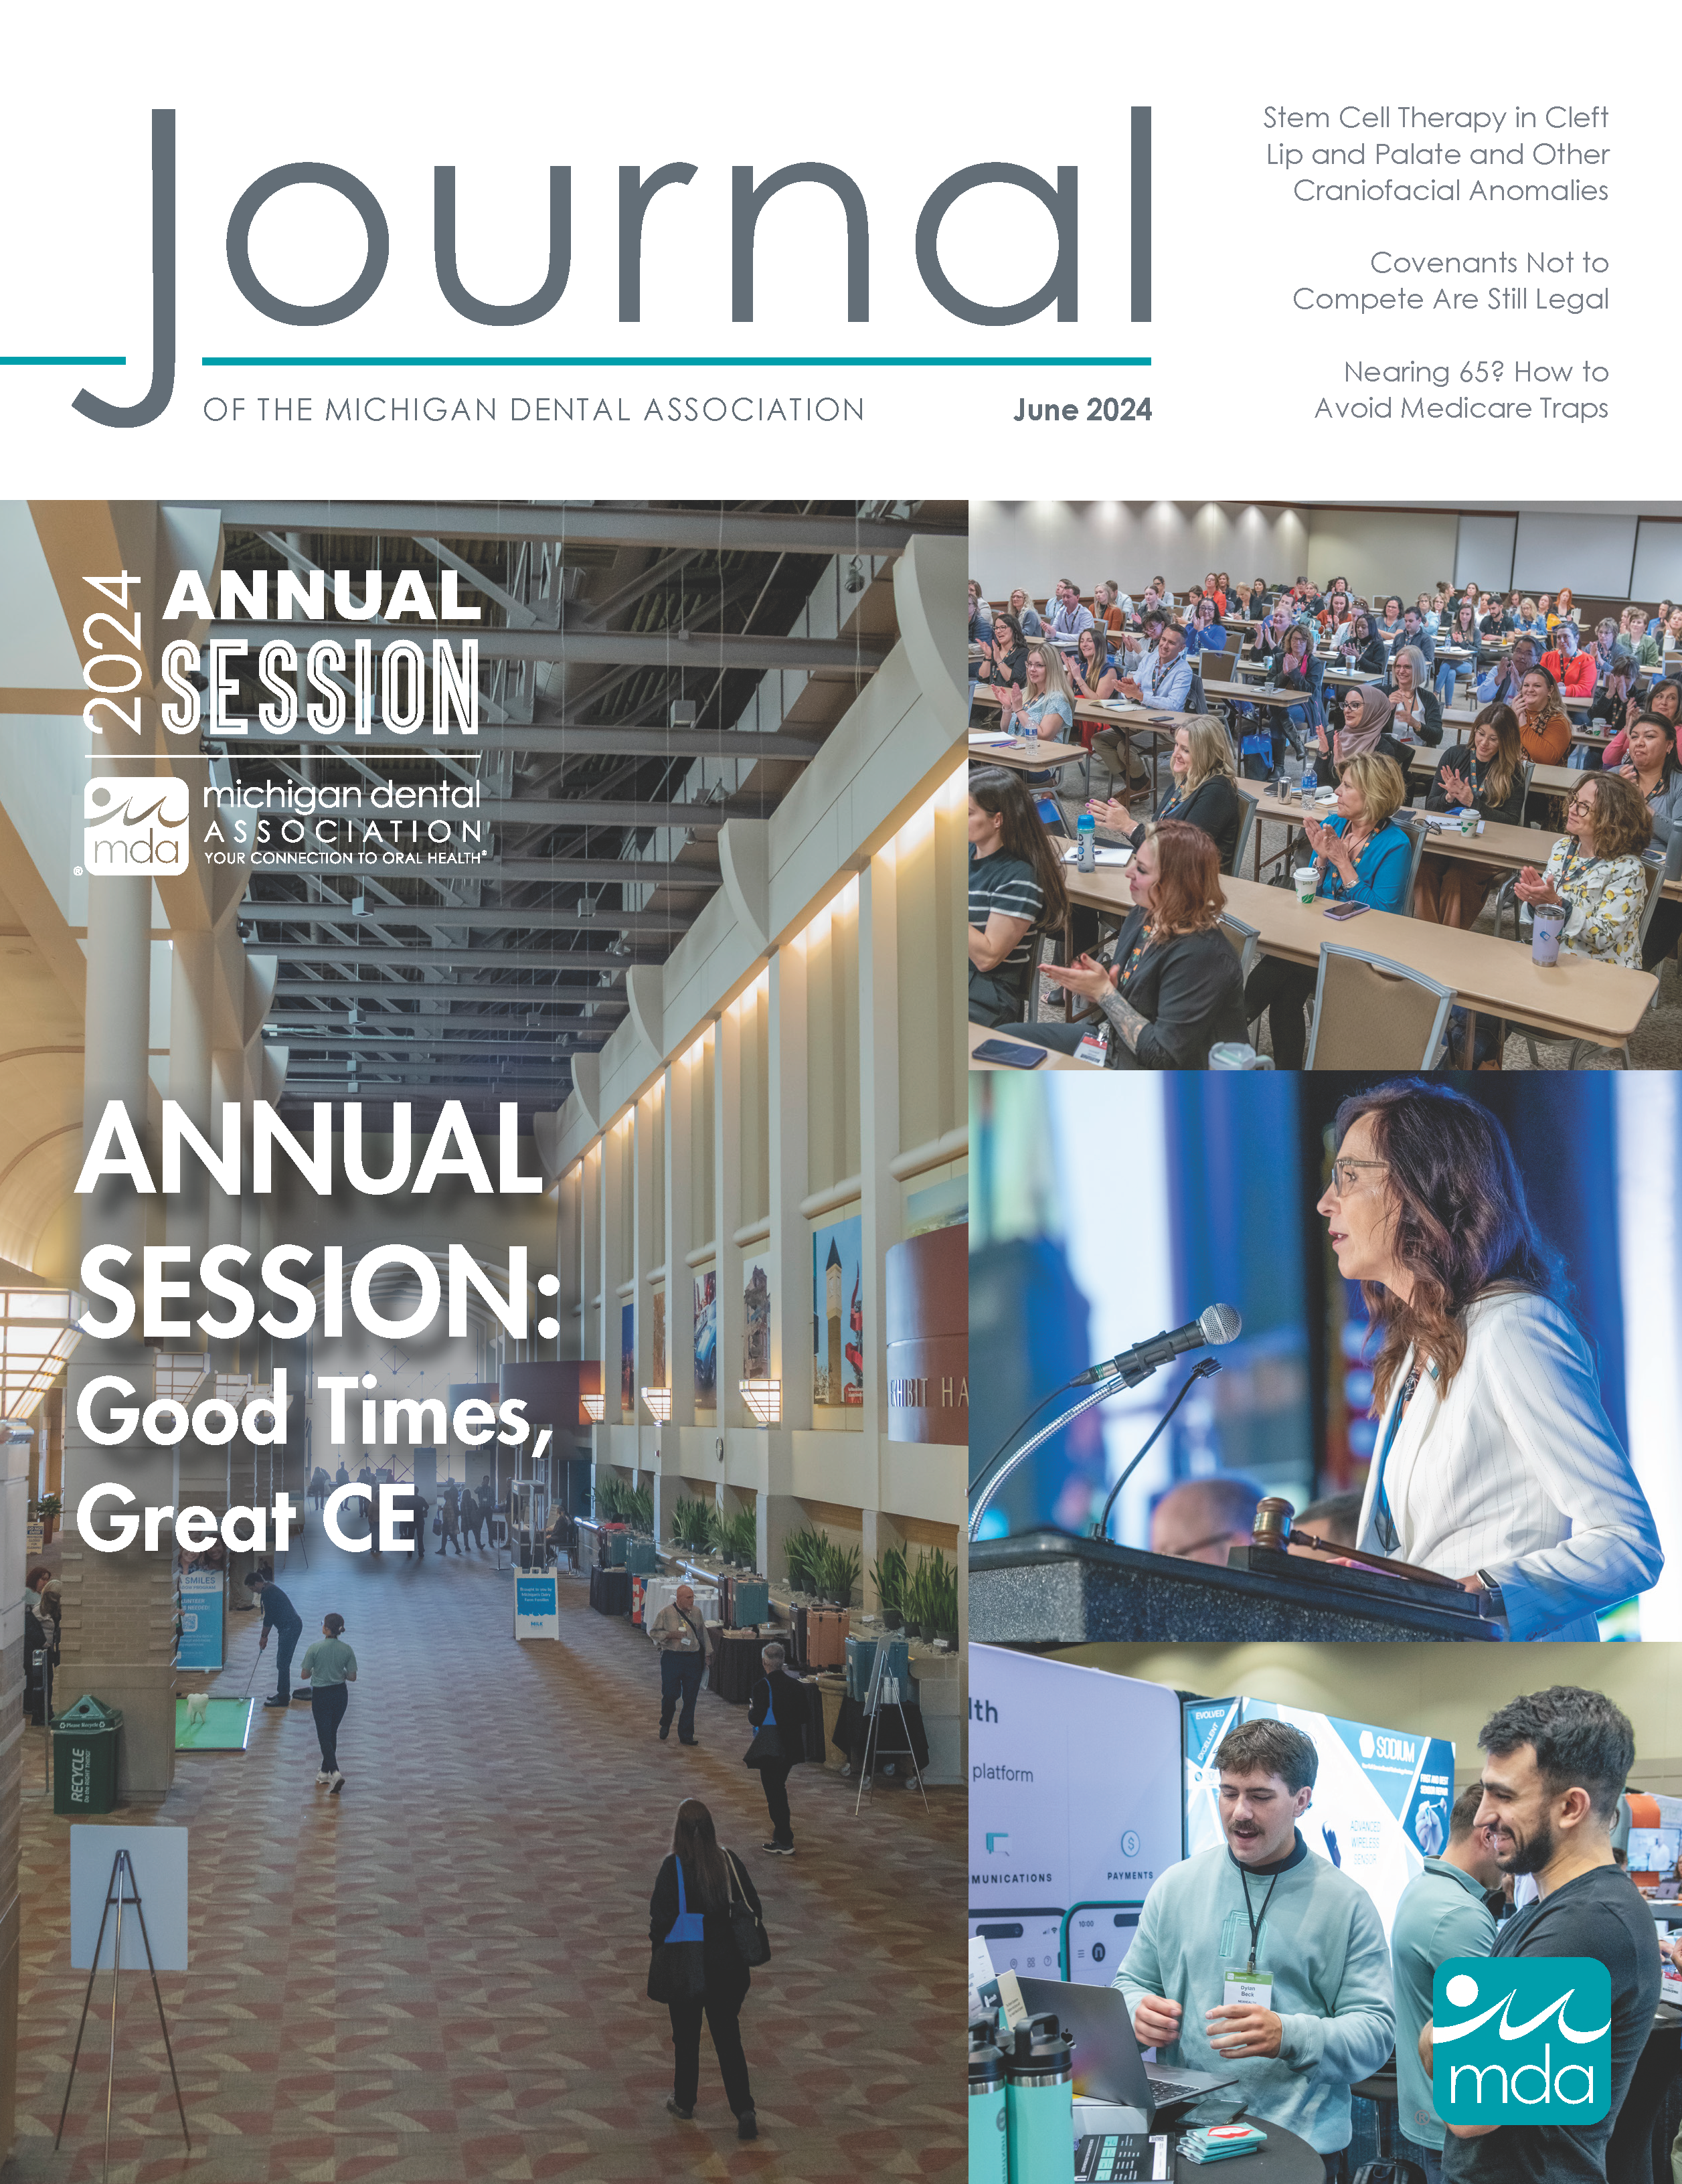 Cover of the Journal of the Michigan Dental Association with with images from the Michigan annual session including an images of the conference center welcome hall, the audience at a presentation, a speaker at a podium, and two people looking at a laptop.